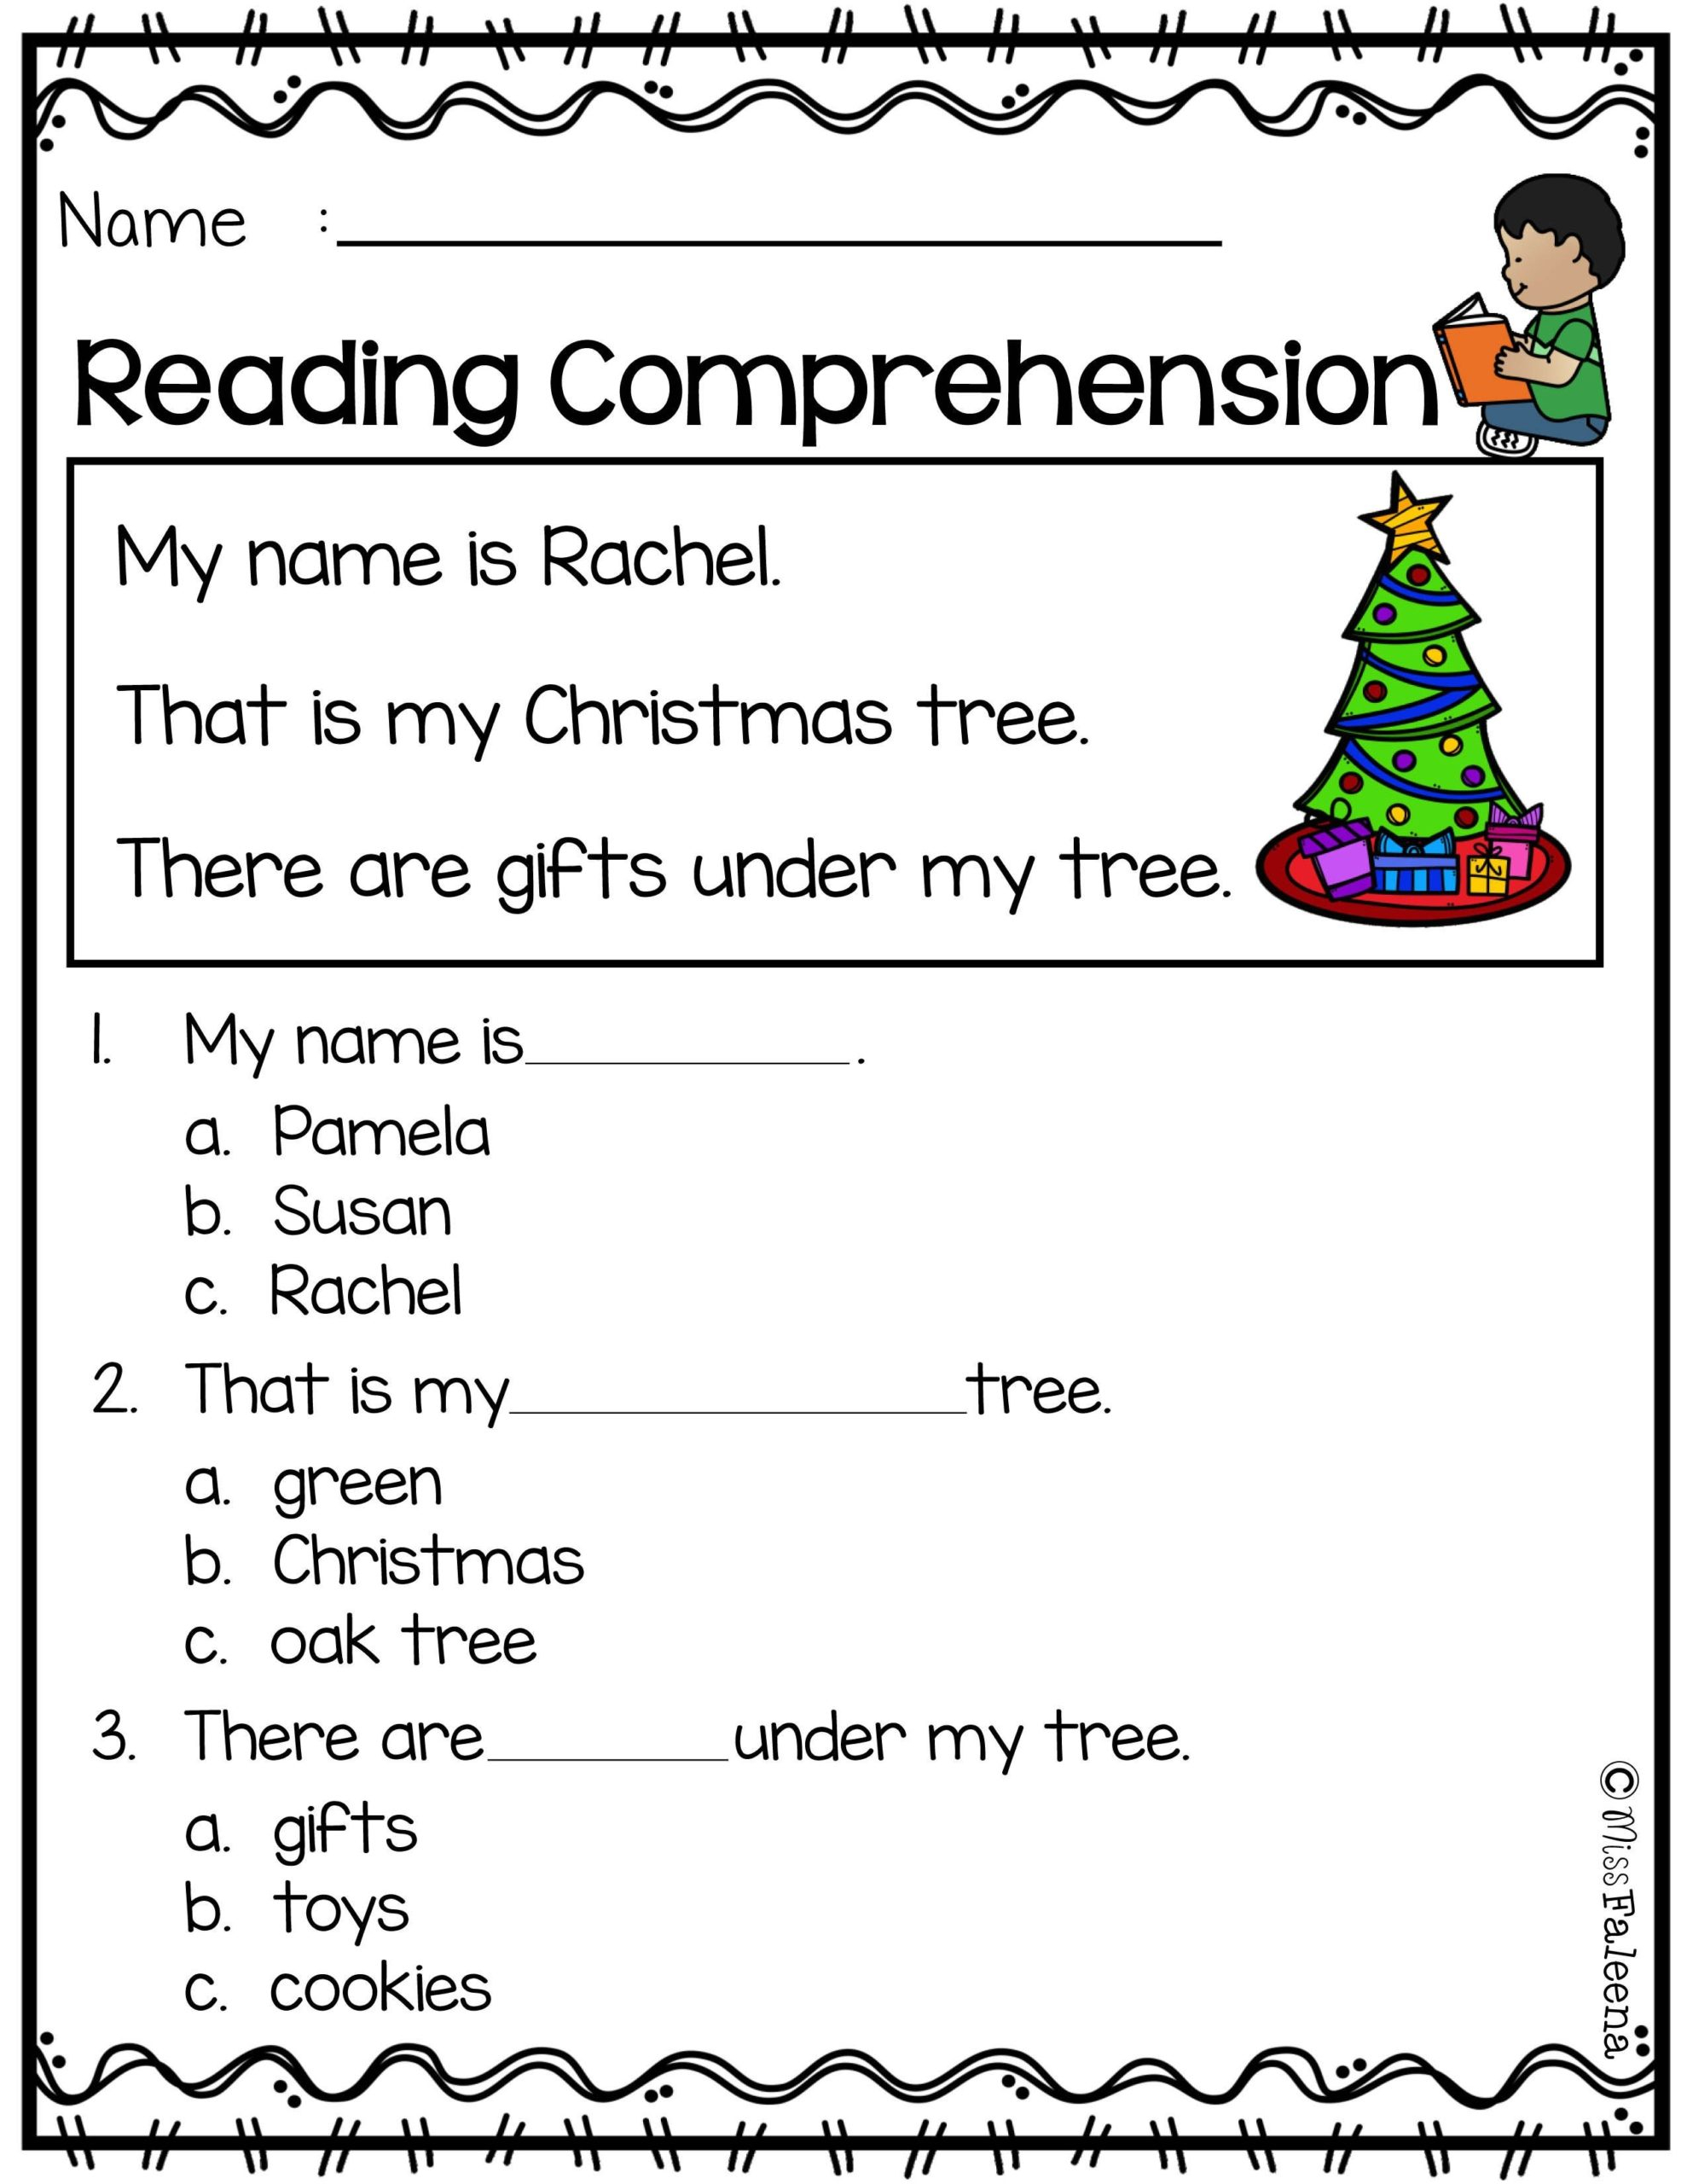 printable-worksheets-for-3rd-grade-grammar-learning-how-english-grammar-worksheet-for-class